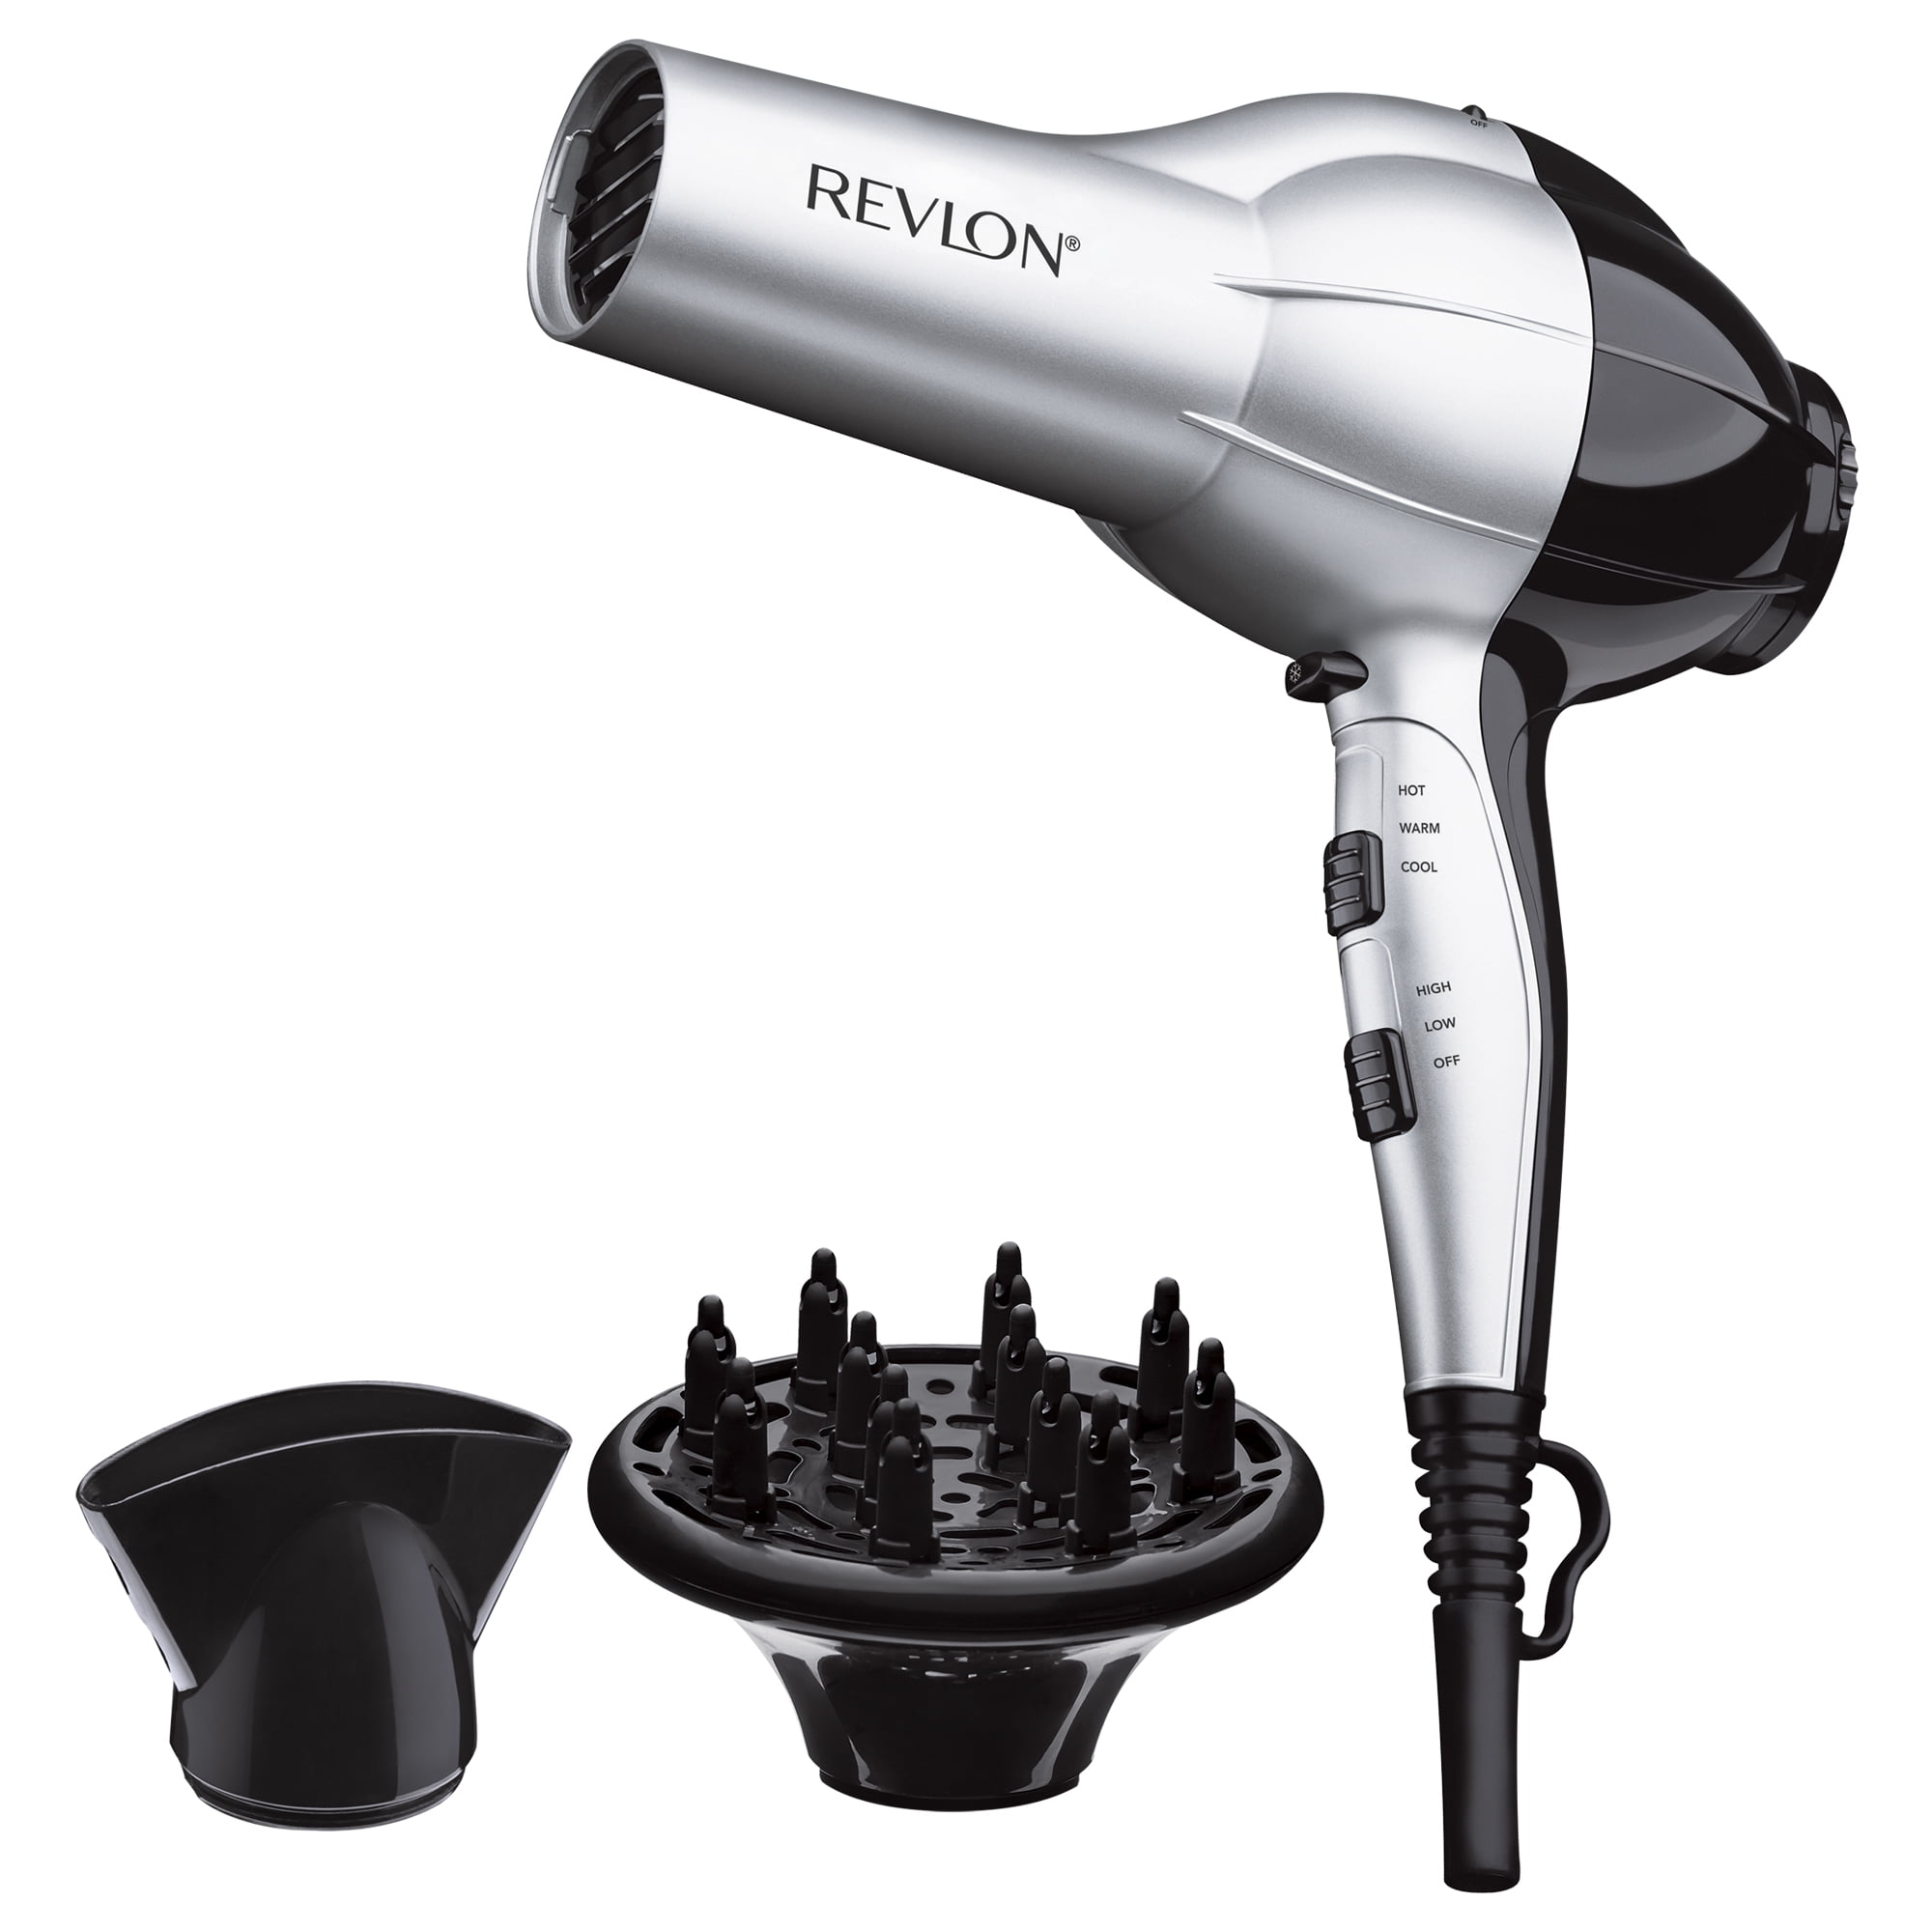 Revlon Perfect Heat Ceramic Turbo Ionic Hair Dryers, Silver with